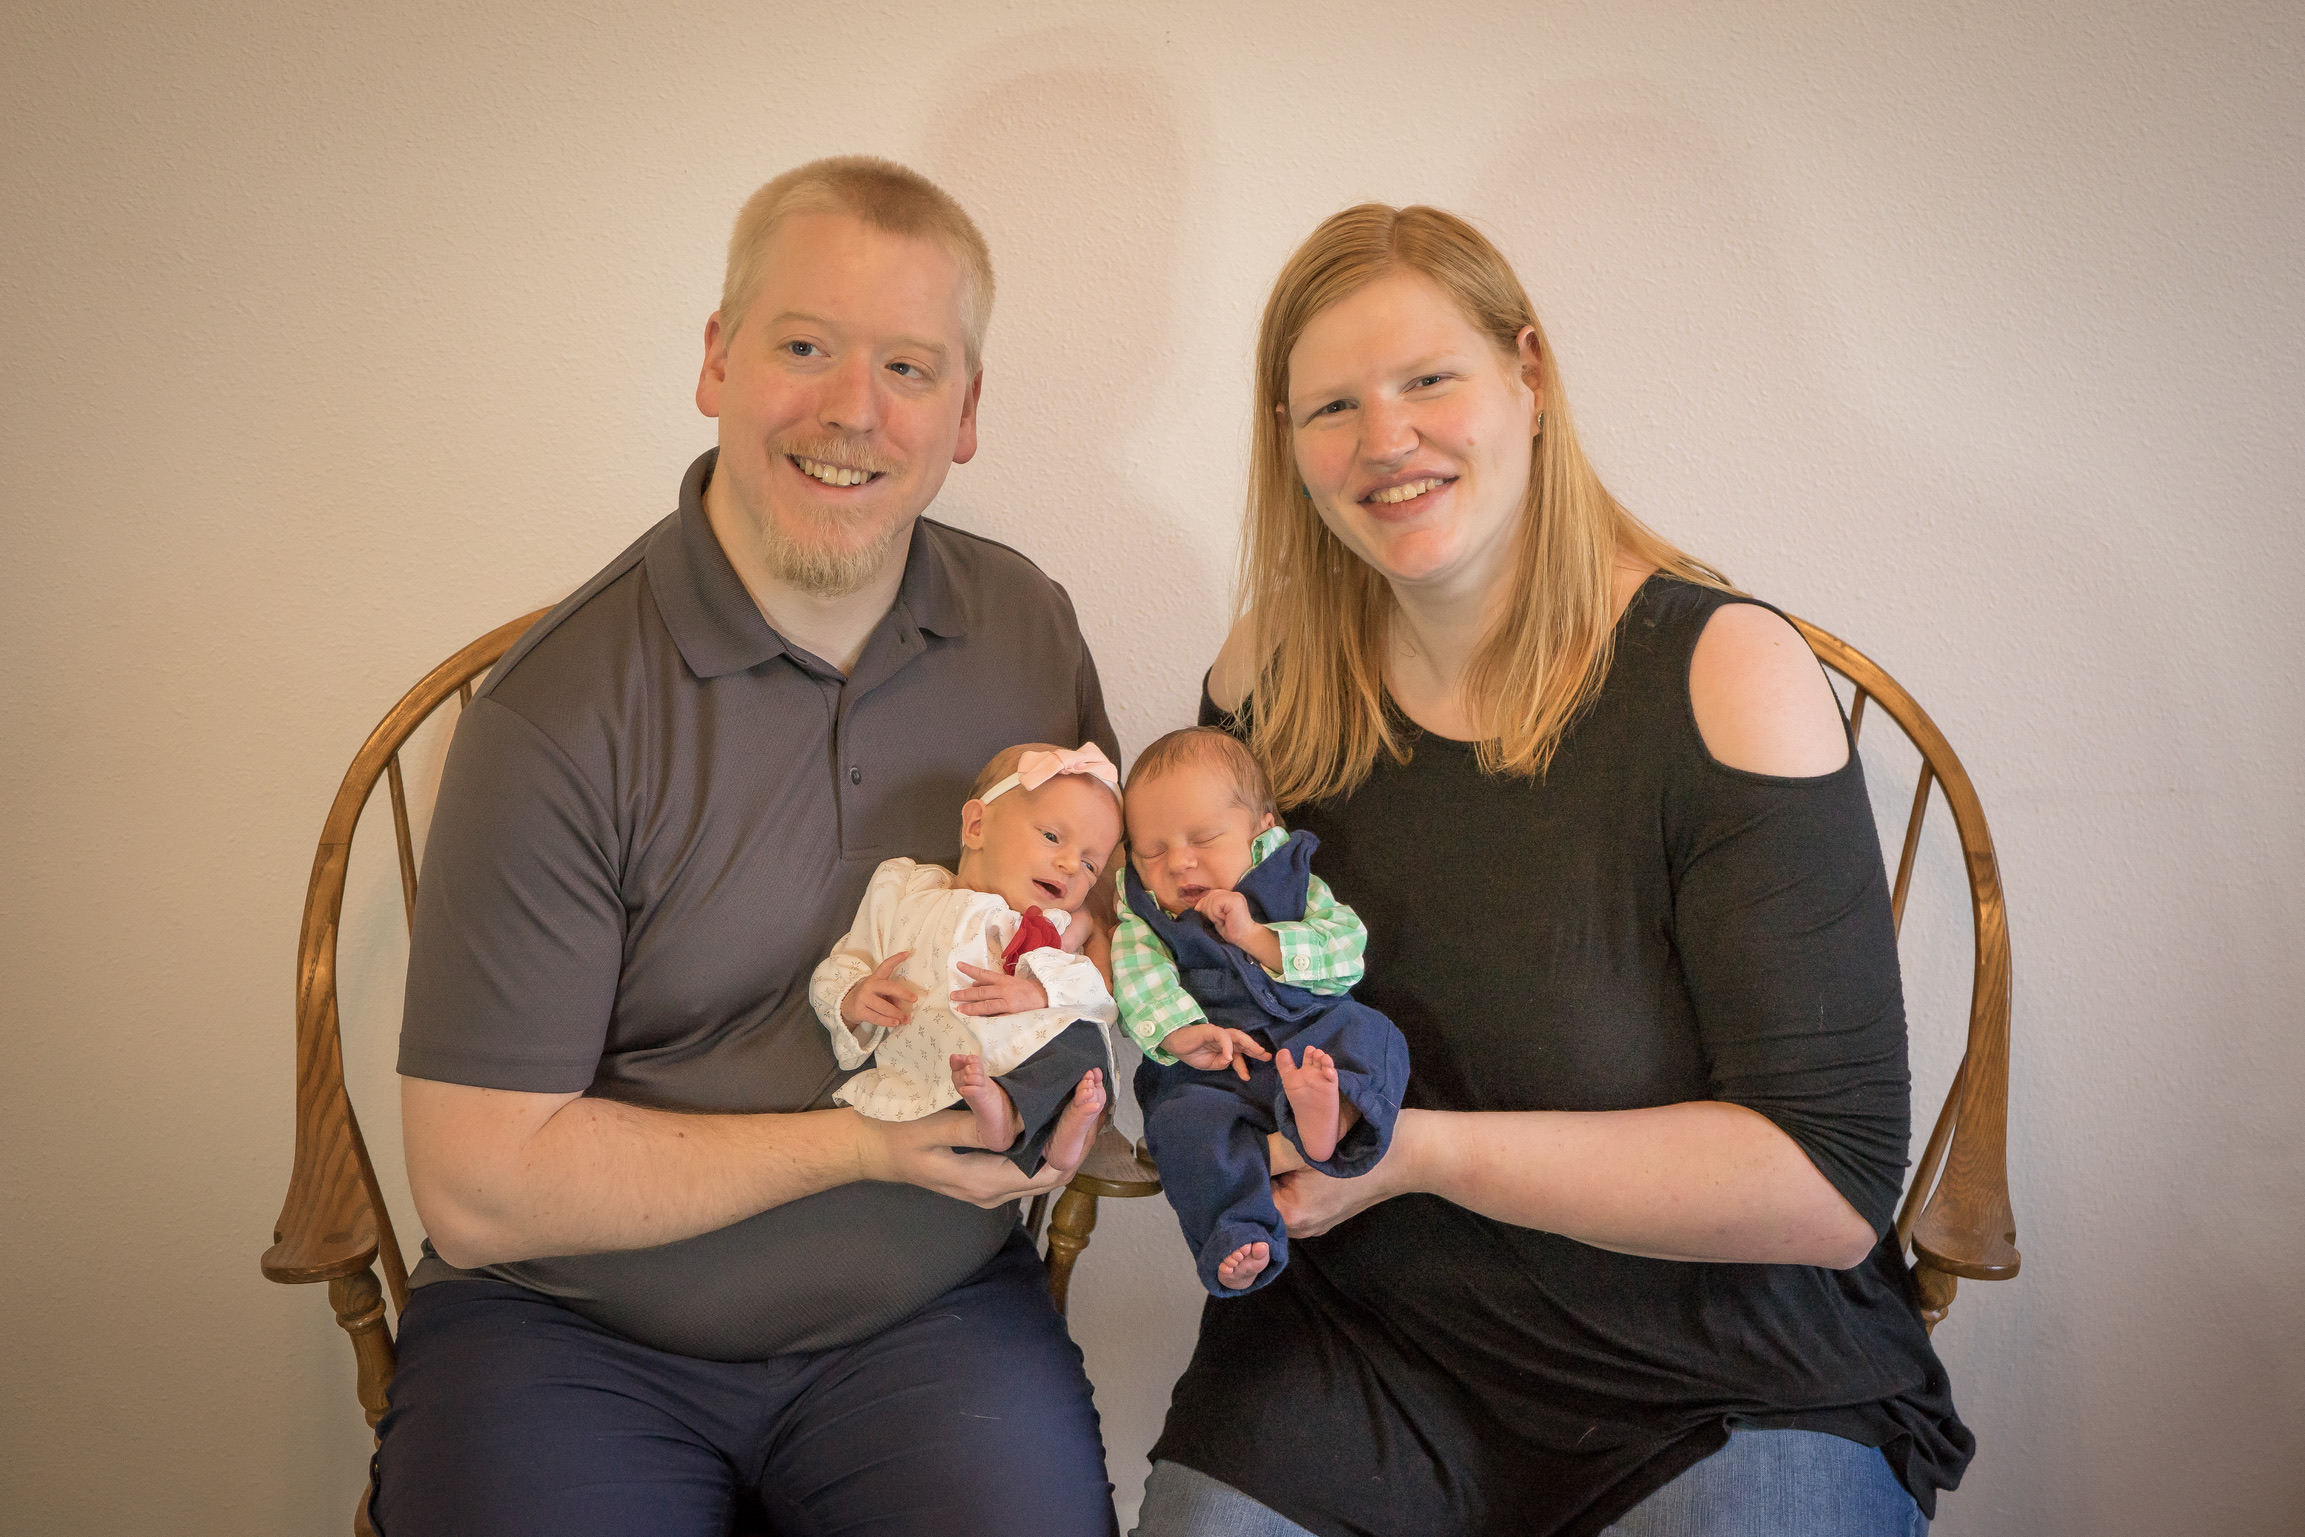 PHOTO: Philip and Rachel Ridgeway welcomed twins Lydia and Timothy, who were born from donated embryos that were frozen back in 1992.